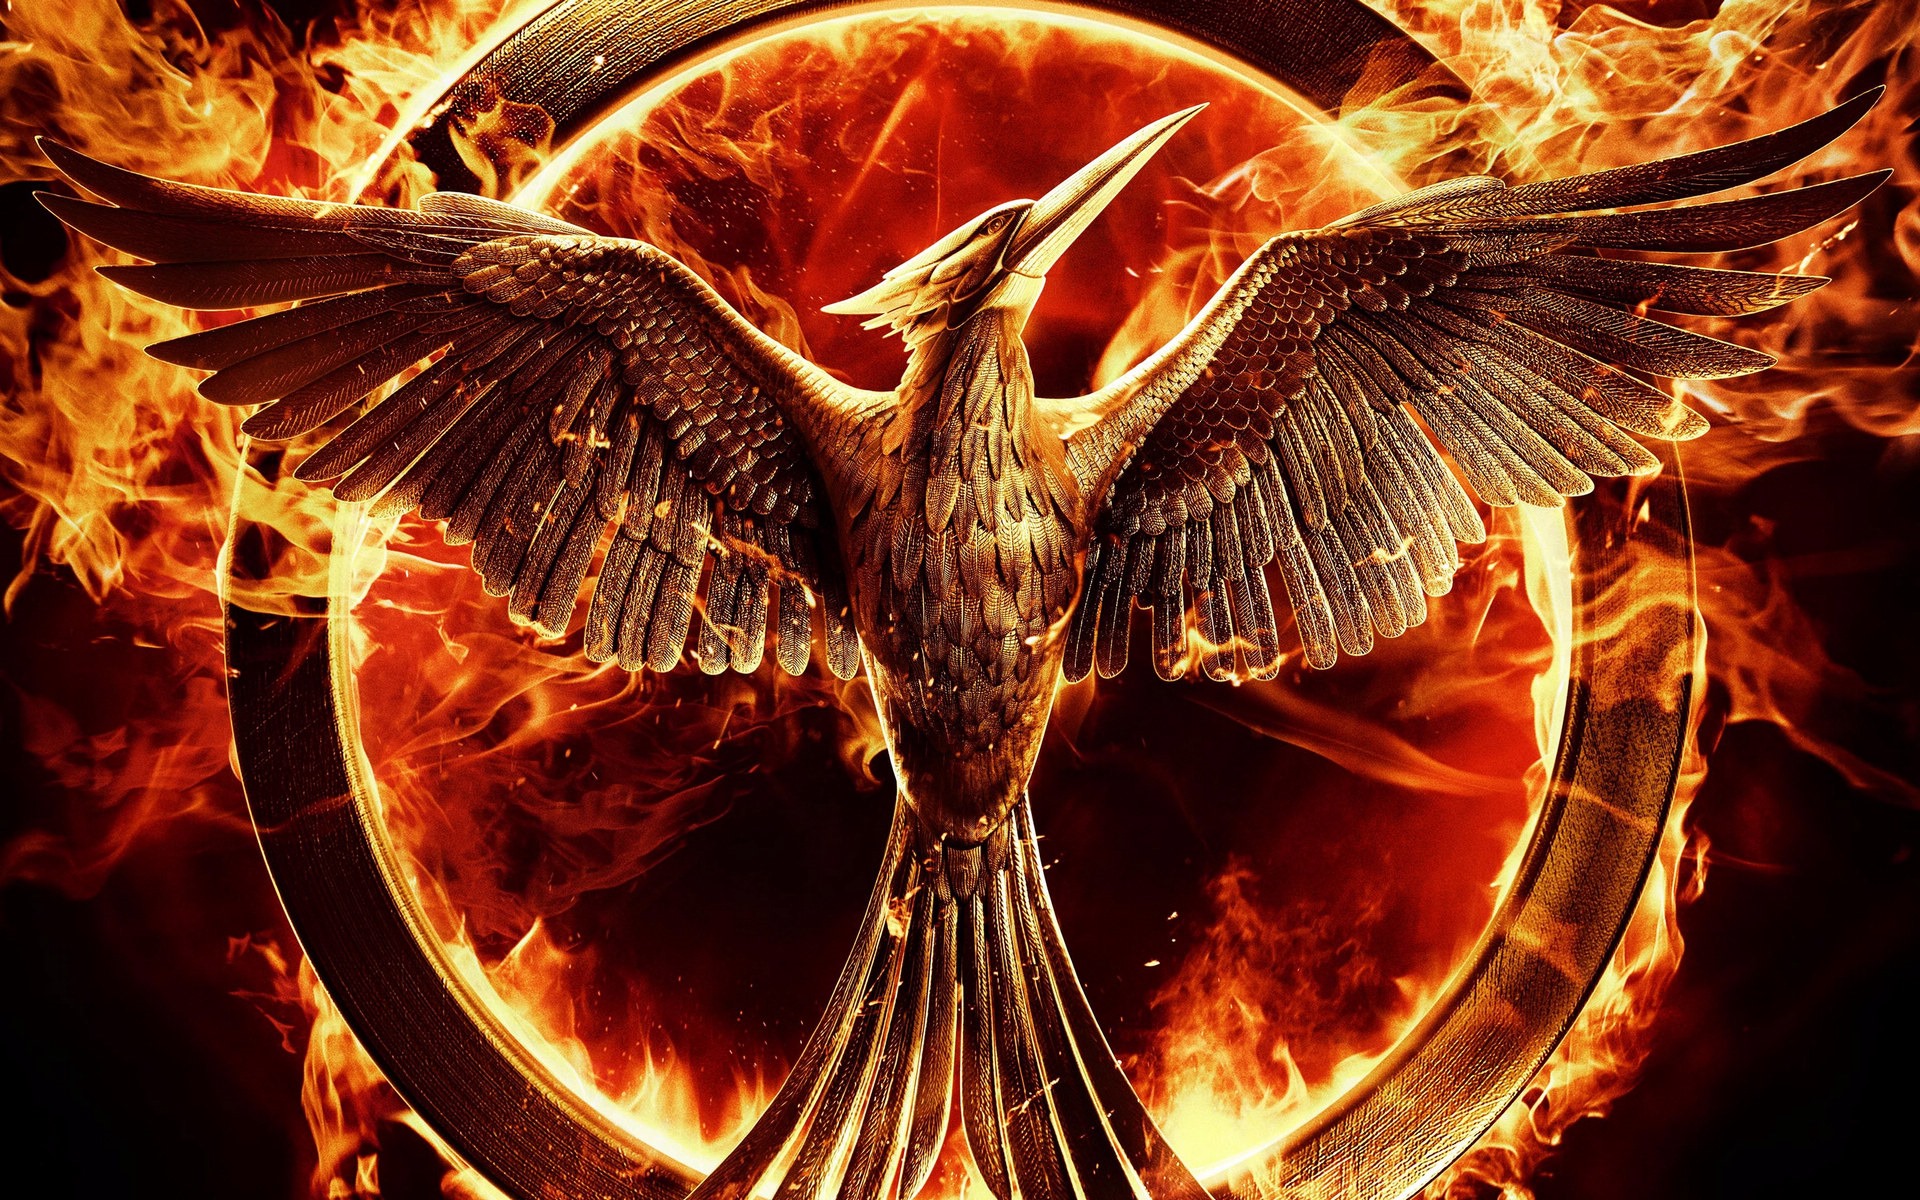 The Hunger Games: Mockingjay HD wallpapers #4 - 1920x1200